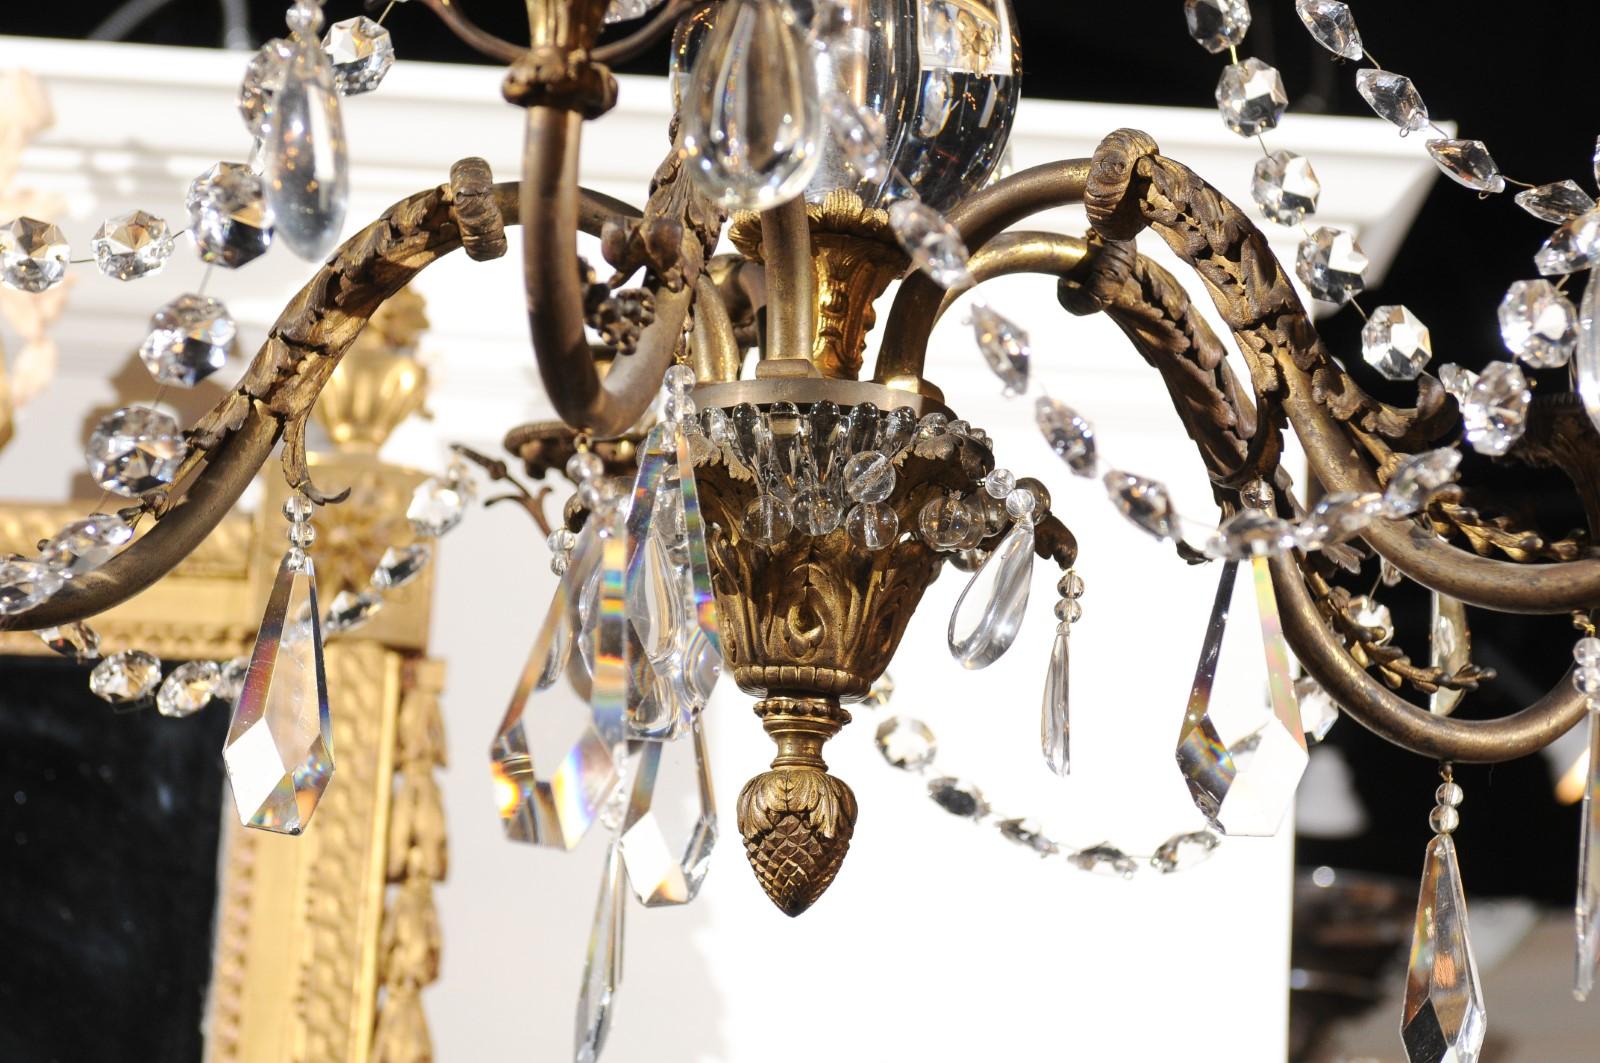 A French crystal and bronze 10-light tiered chandelier from the 19th century, with large crystal stem and scrolling arms. Born in France during the 19th century, this exquisite chandelier features a central stem, draped with petite faceted crystals